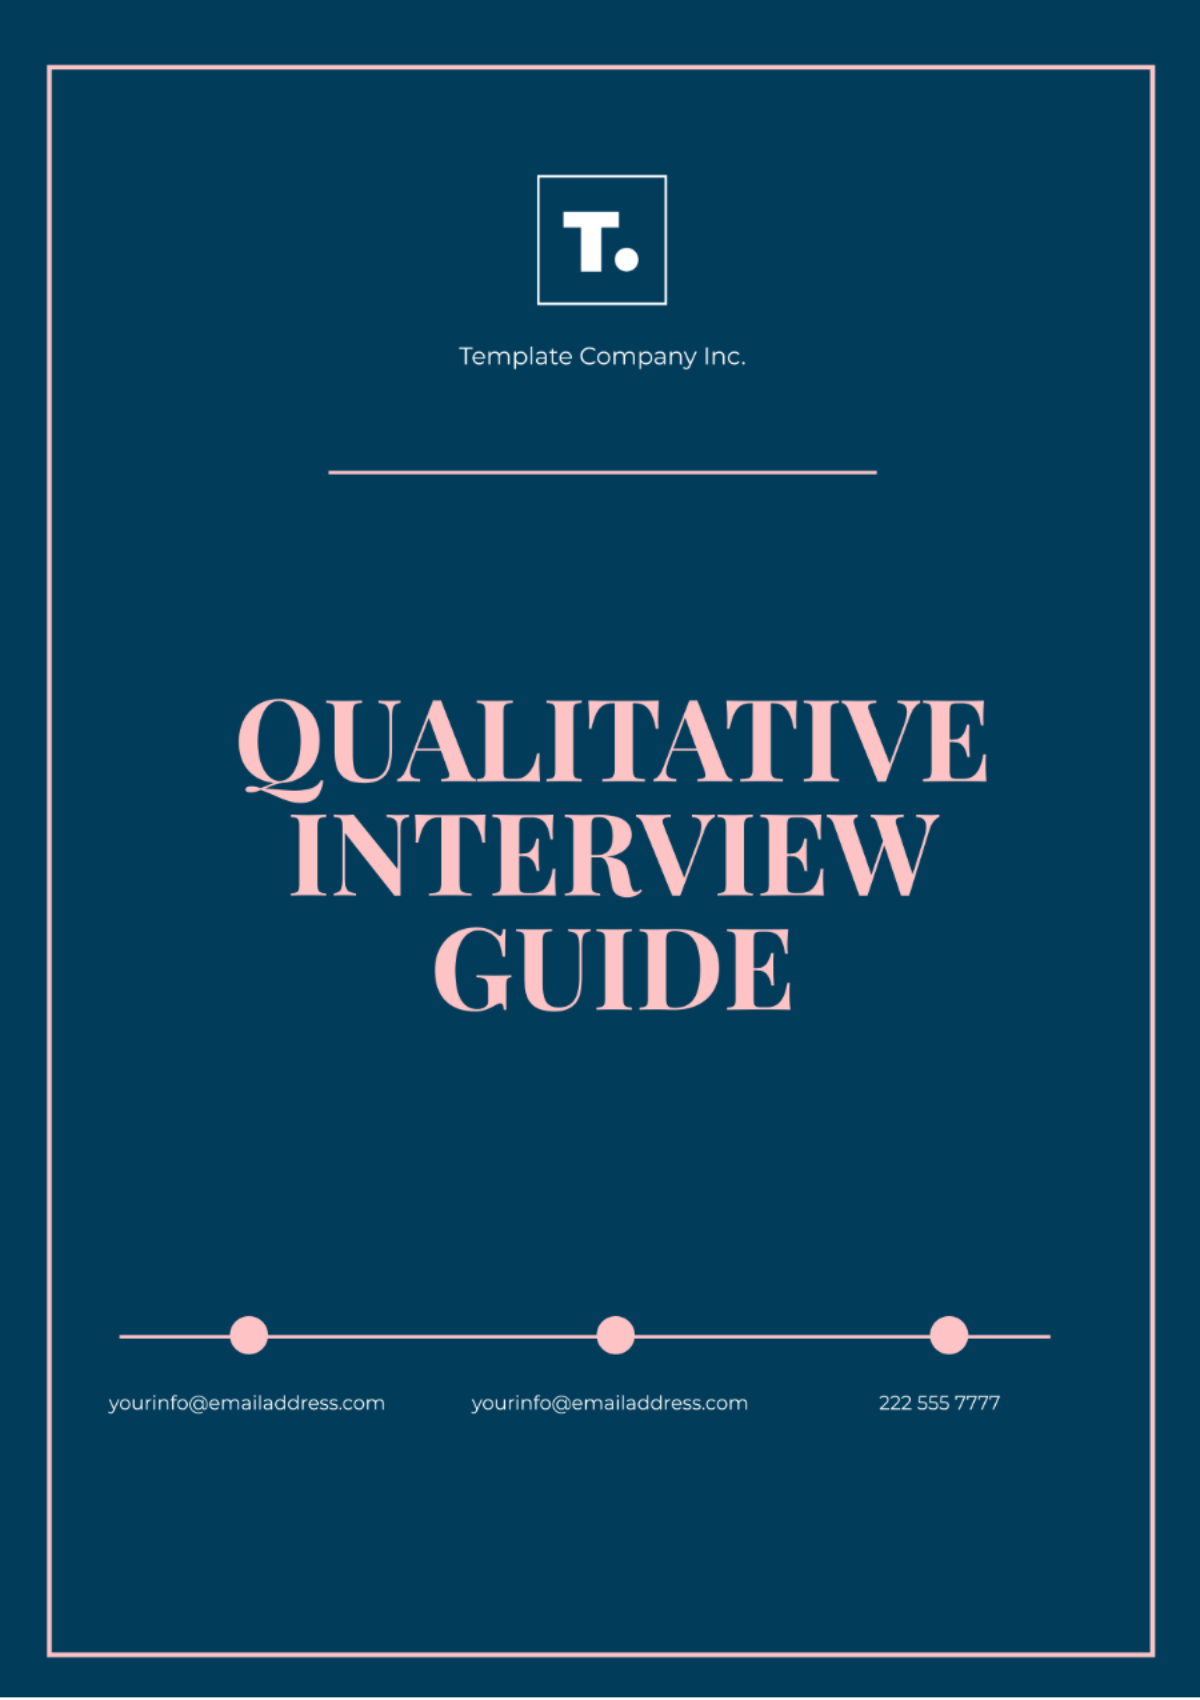 Free Qualitative Interview Guide Template